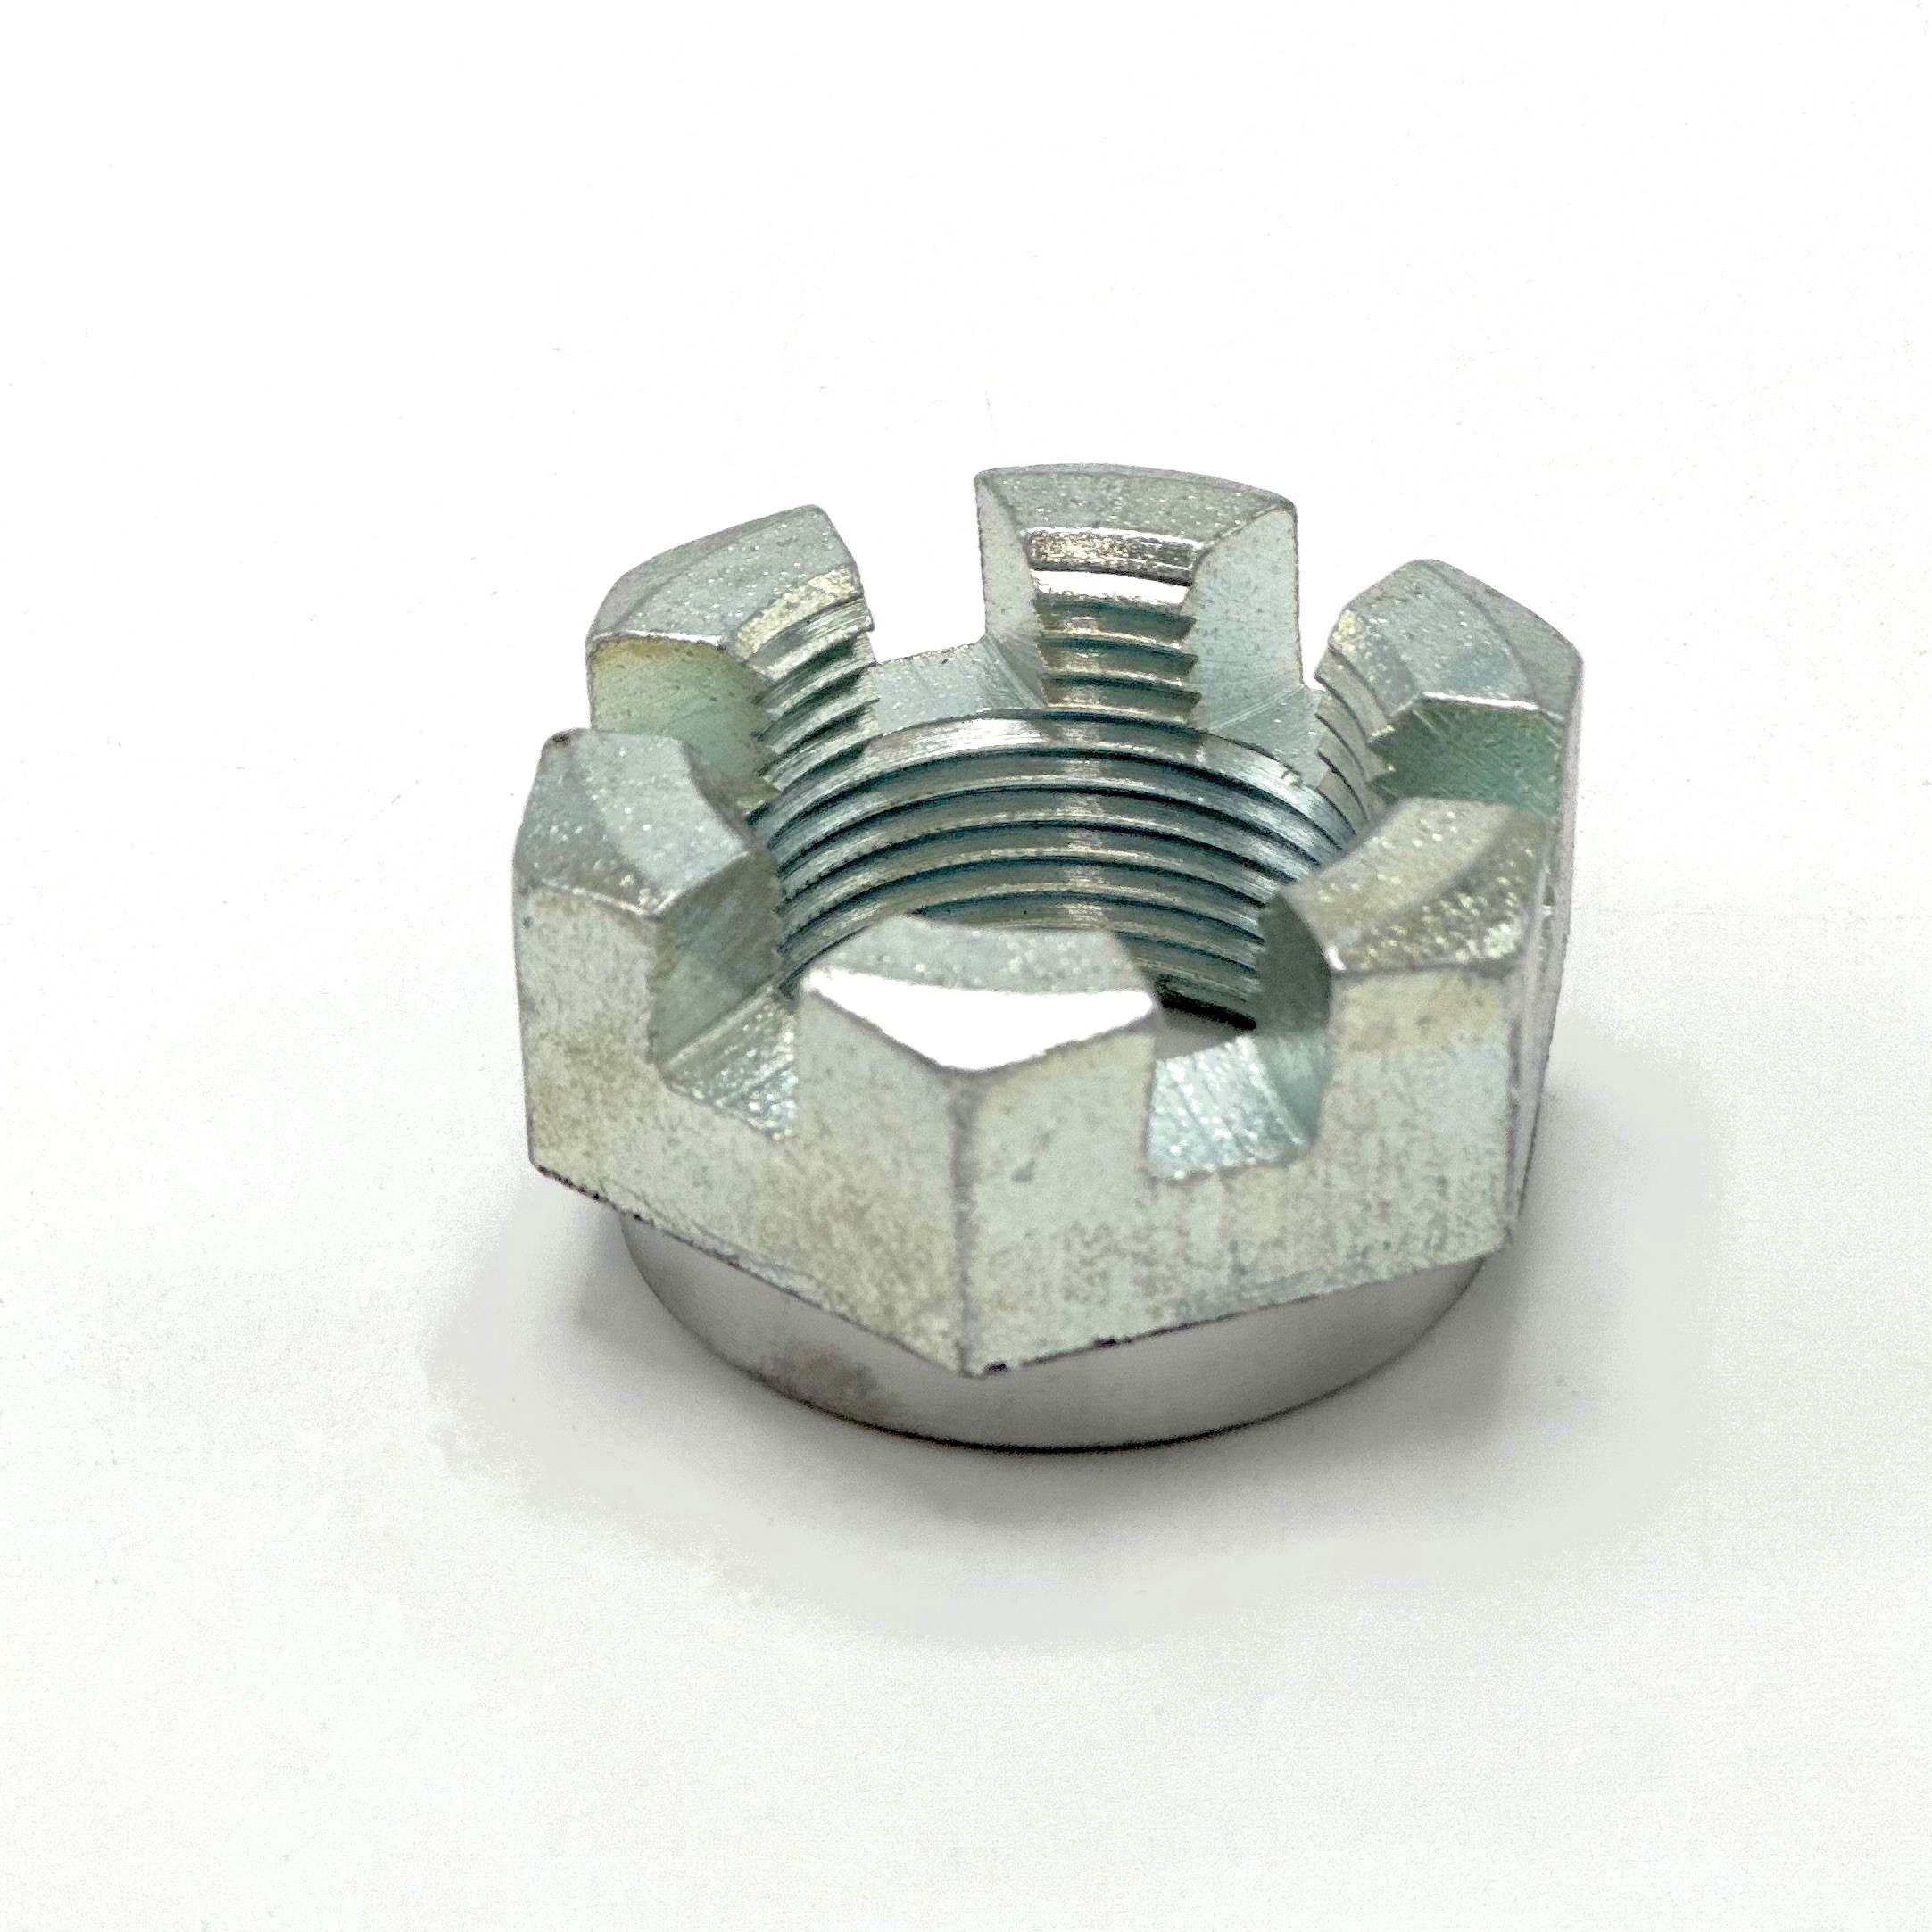 NHRK86837915 Slotted Nut - Replaces 86837915